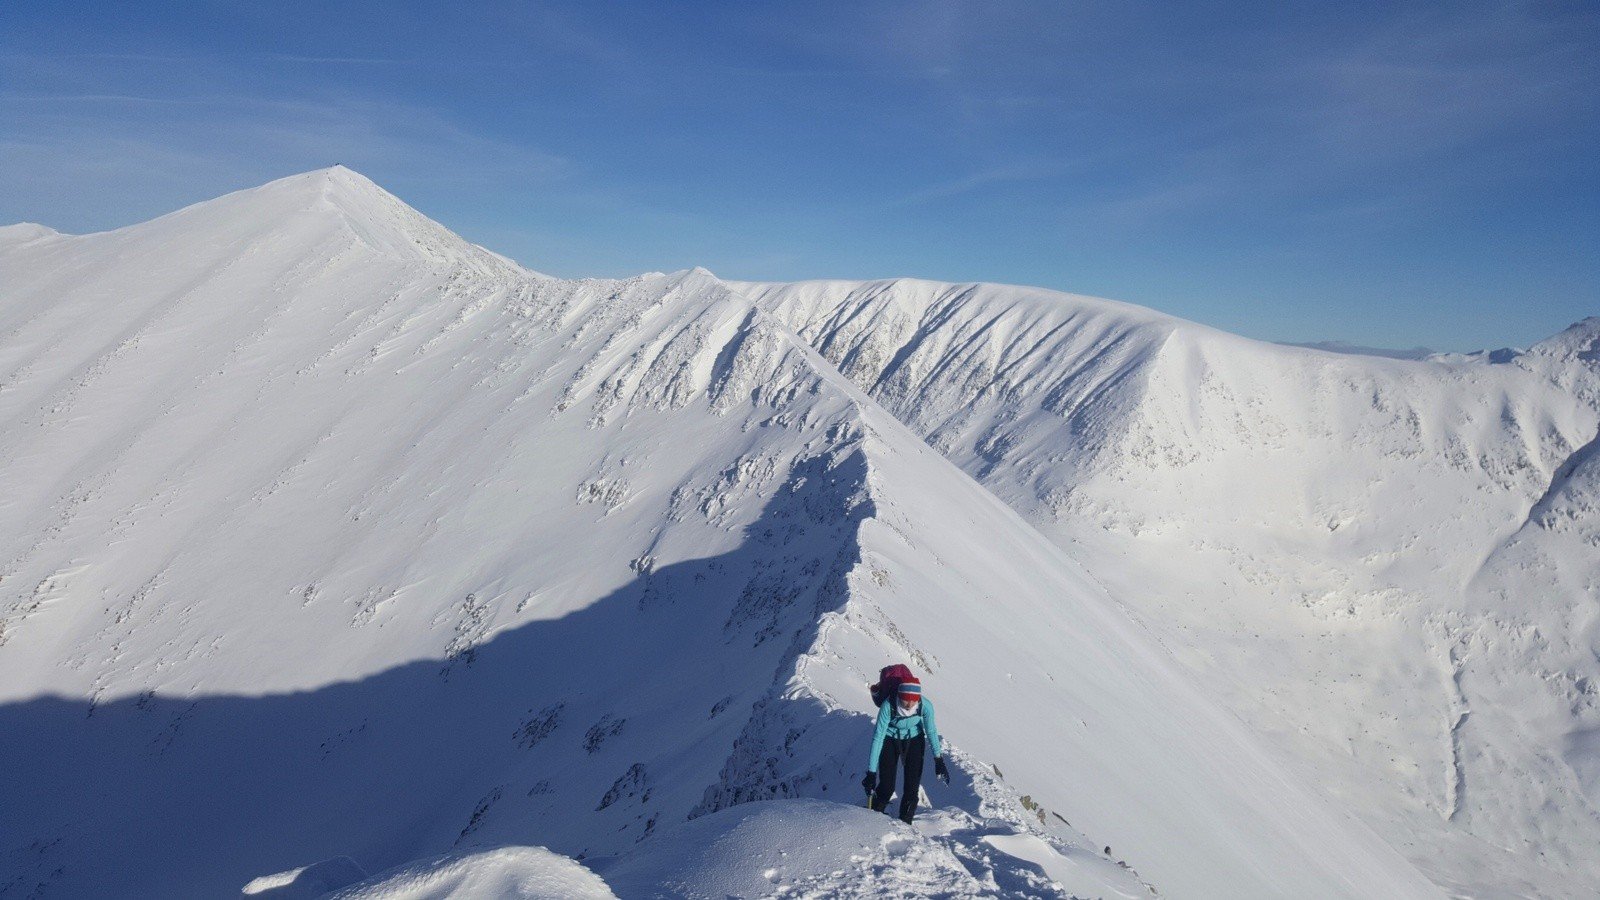 Climbing Ben Nevis on the CMD route in winter. This is the highest mountain in the UK.